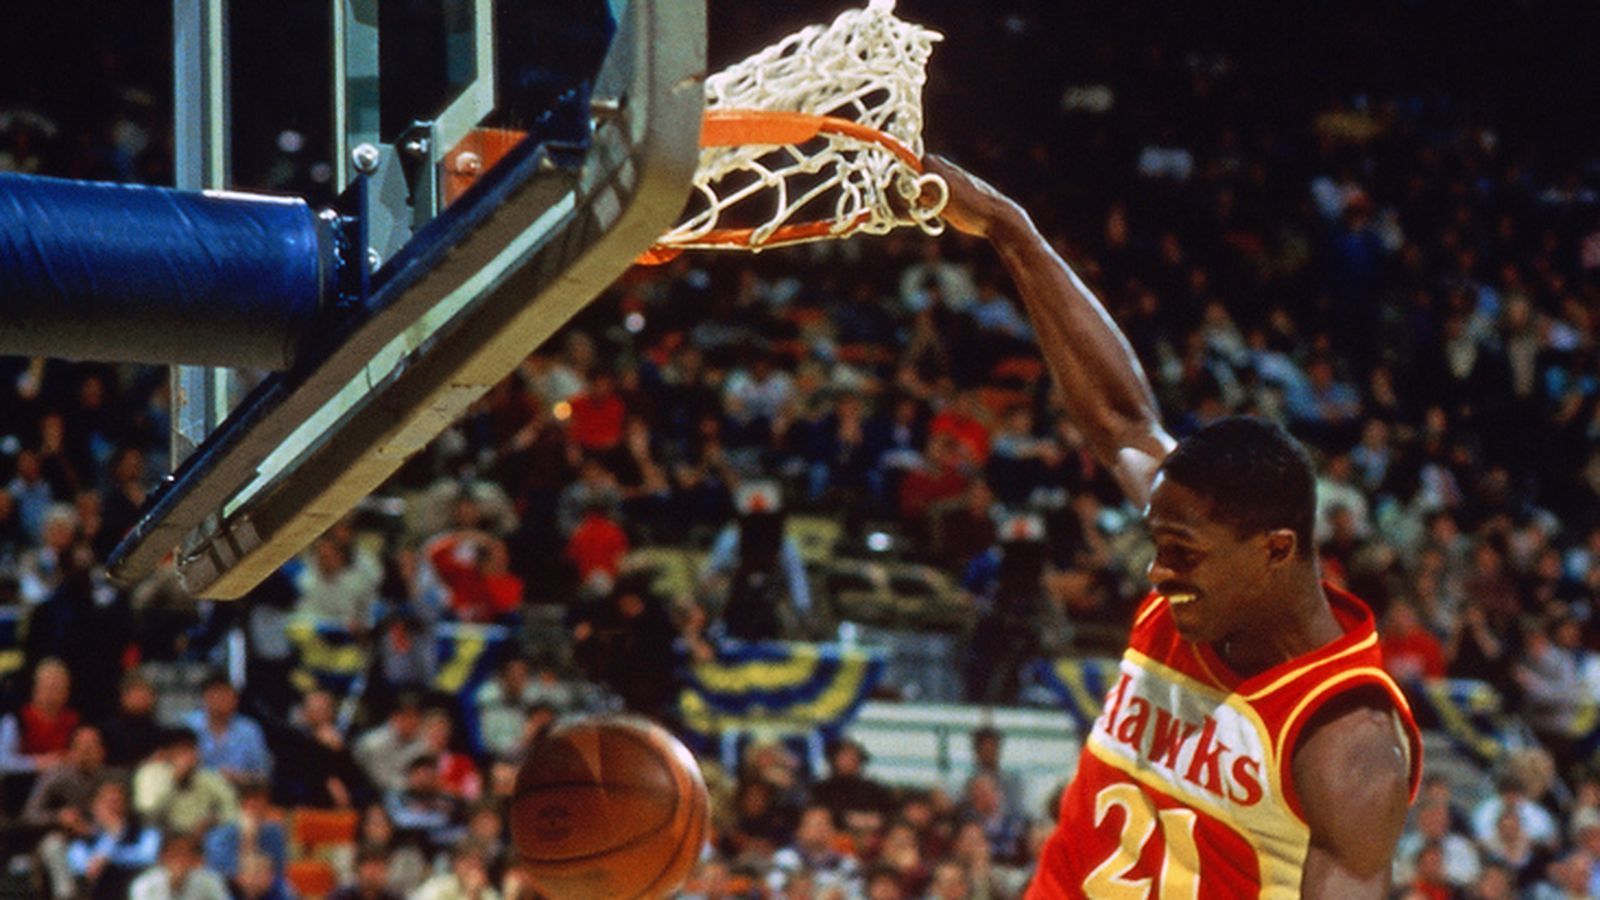 The evolution of the windmill: From Dominique Wilkins to present day